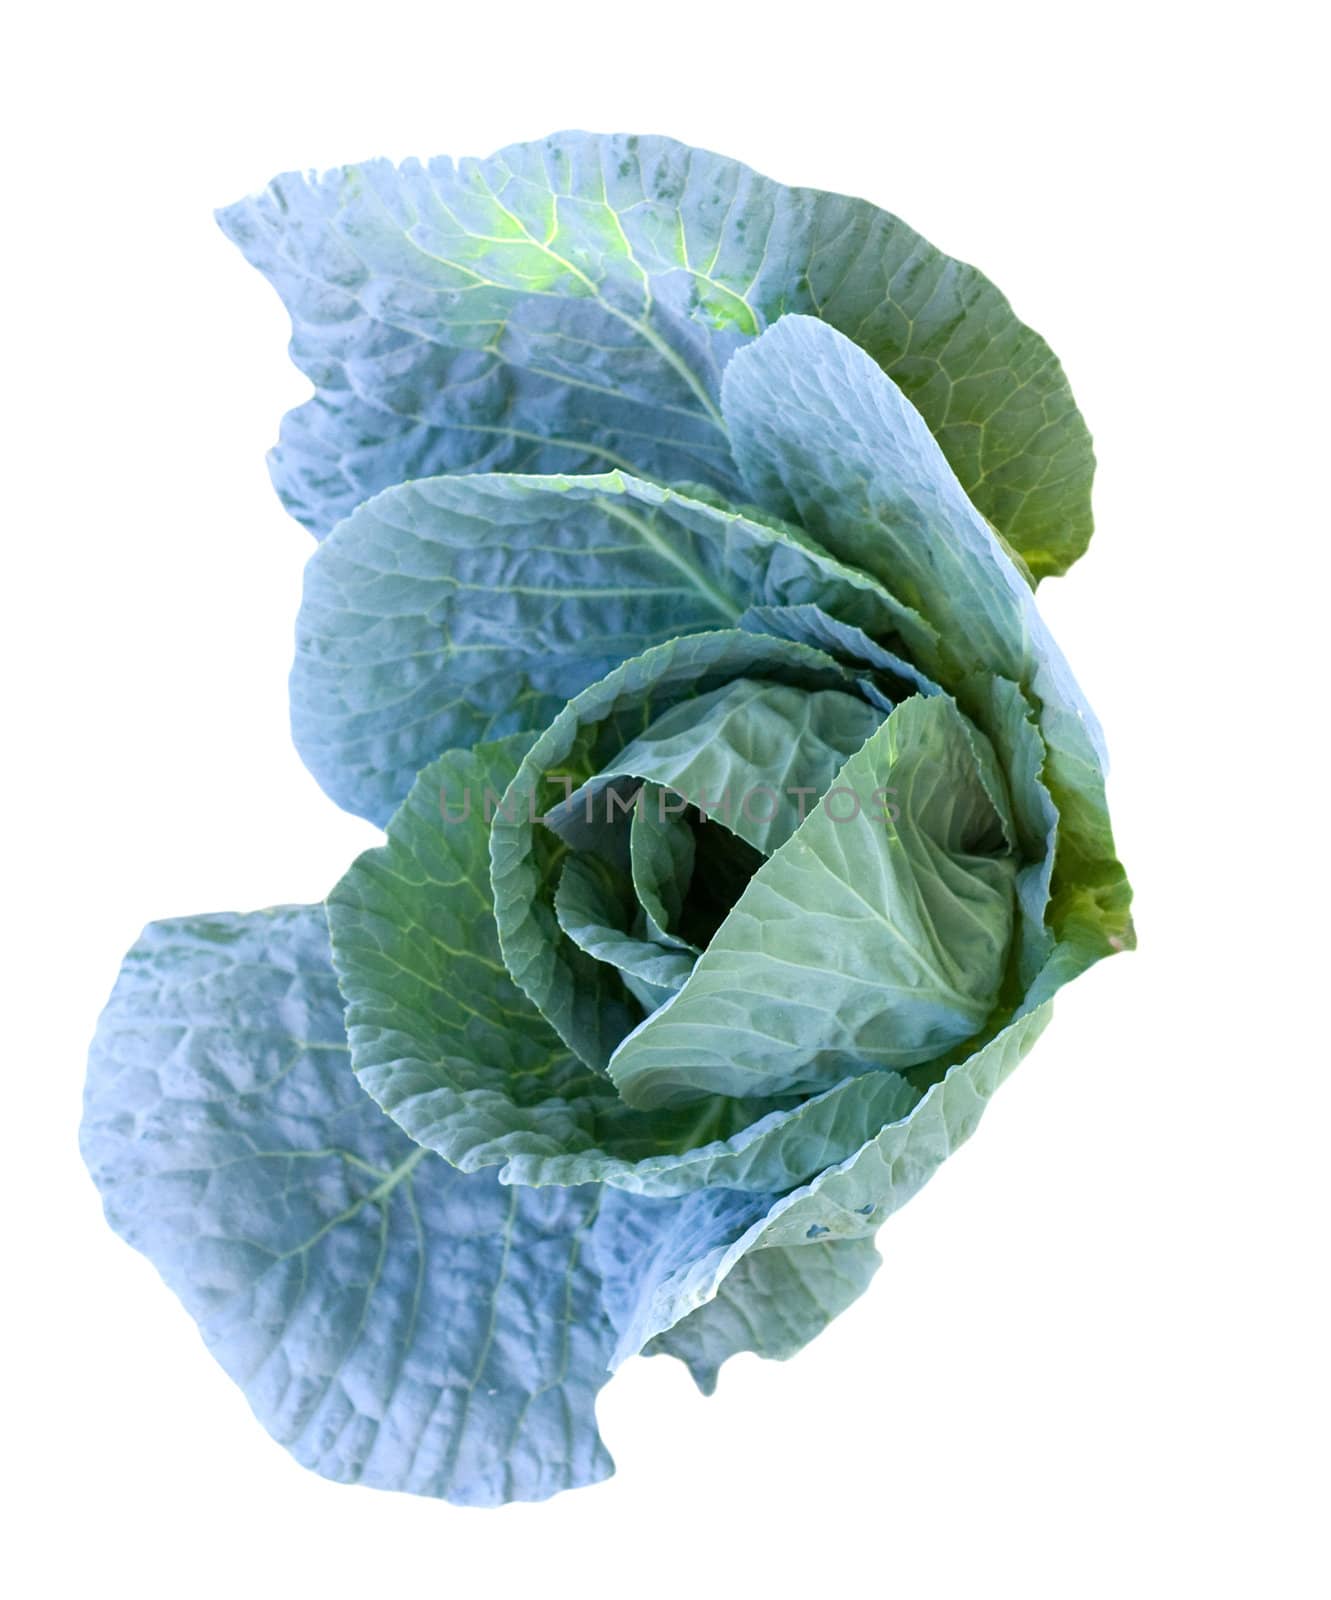 cabbage head growing on the vegetable bed  by schankz